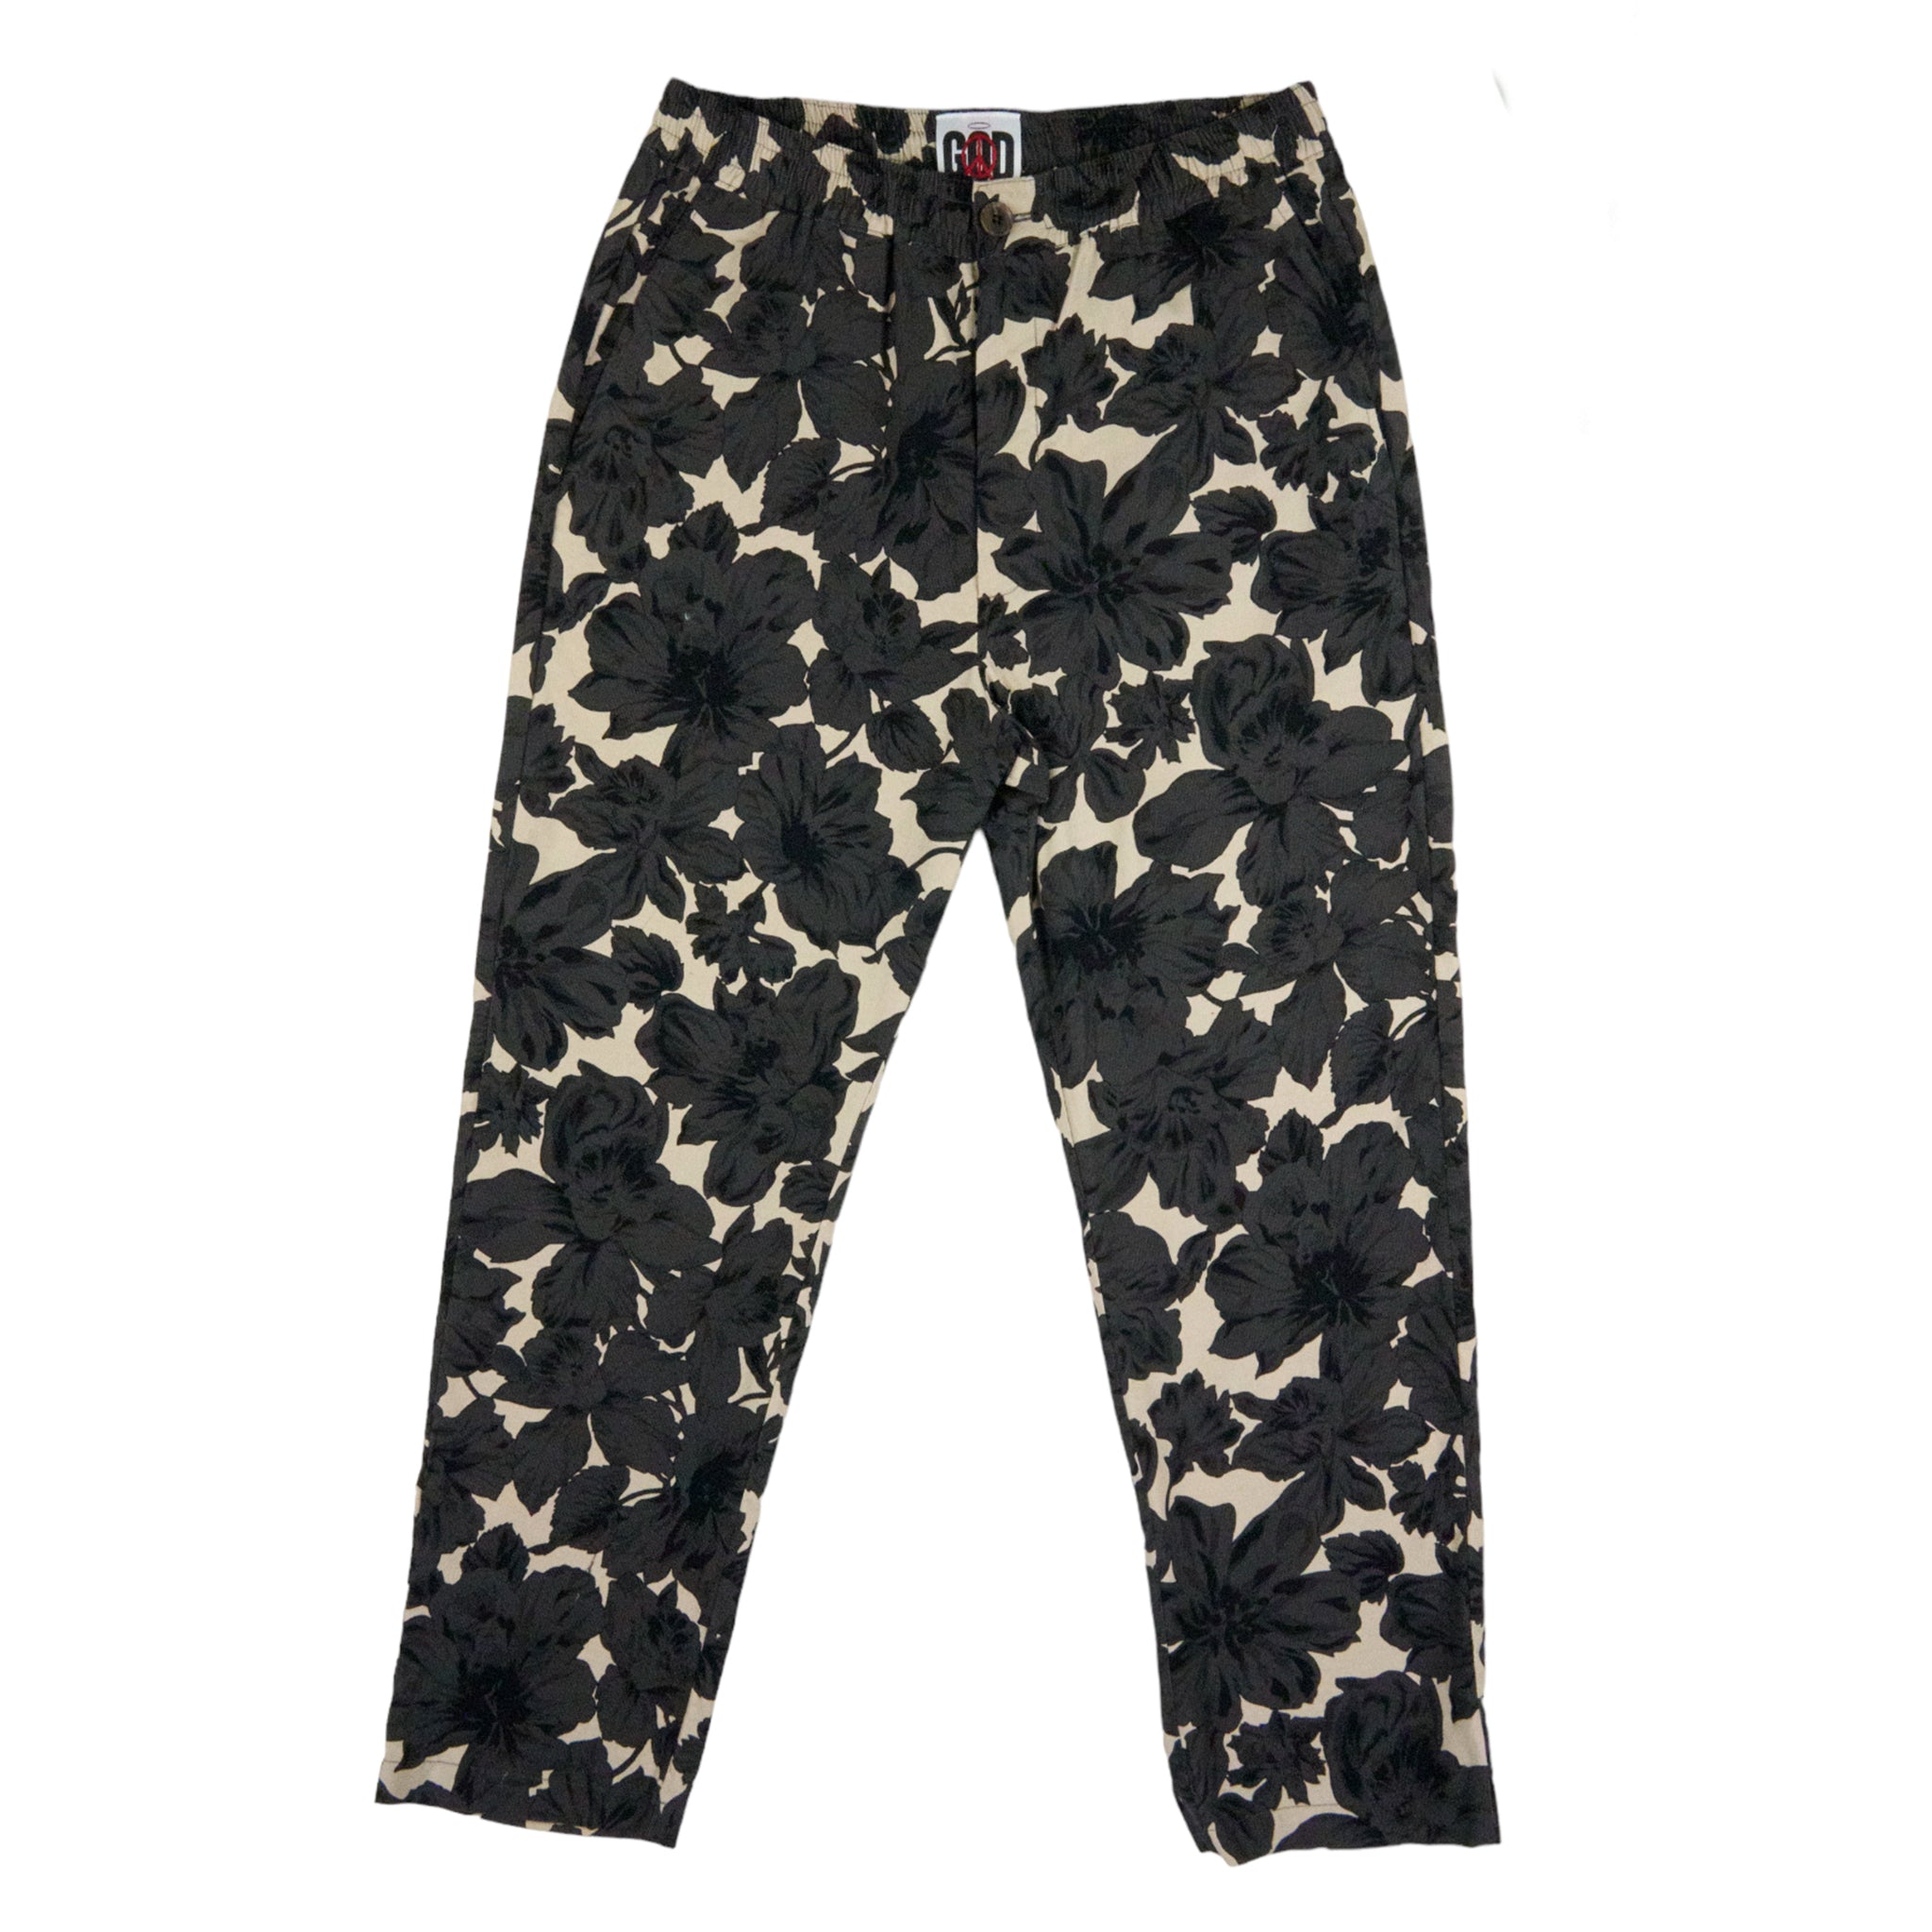 God Floral Needlecord Chef's Trouser